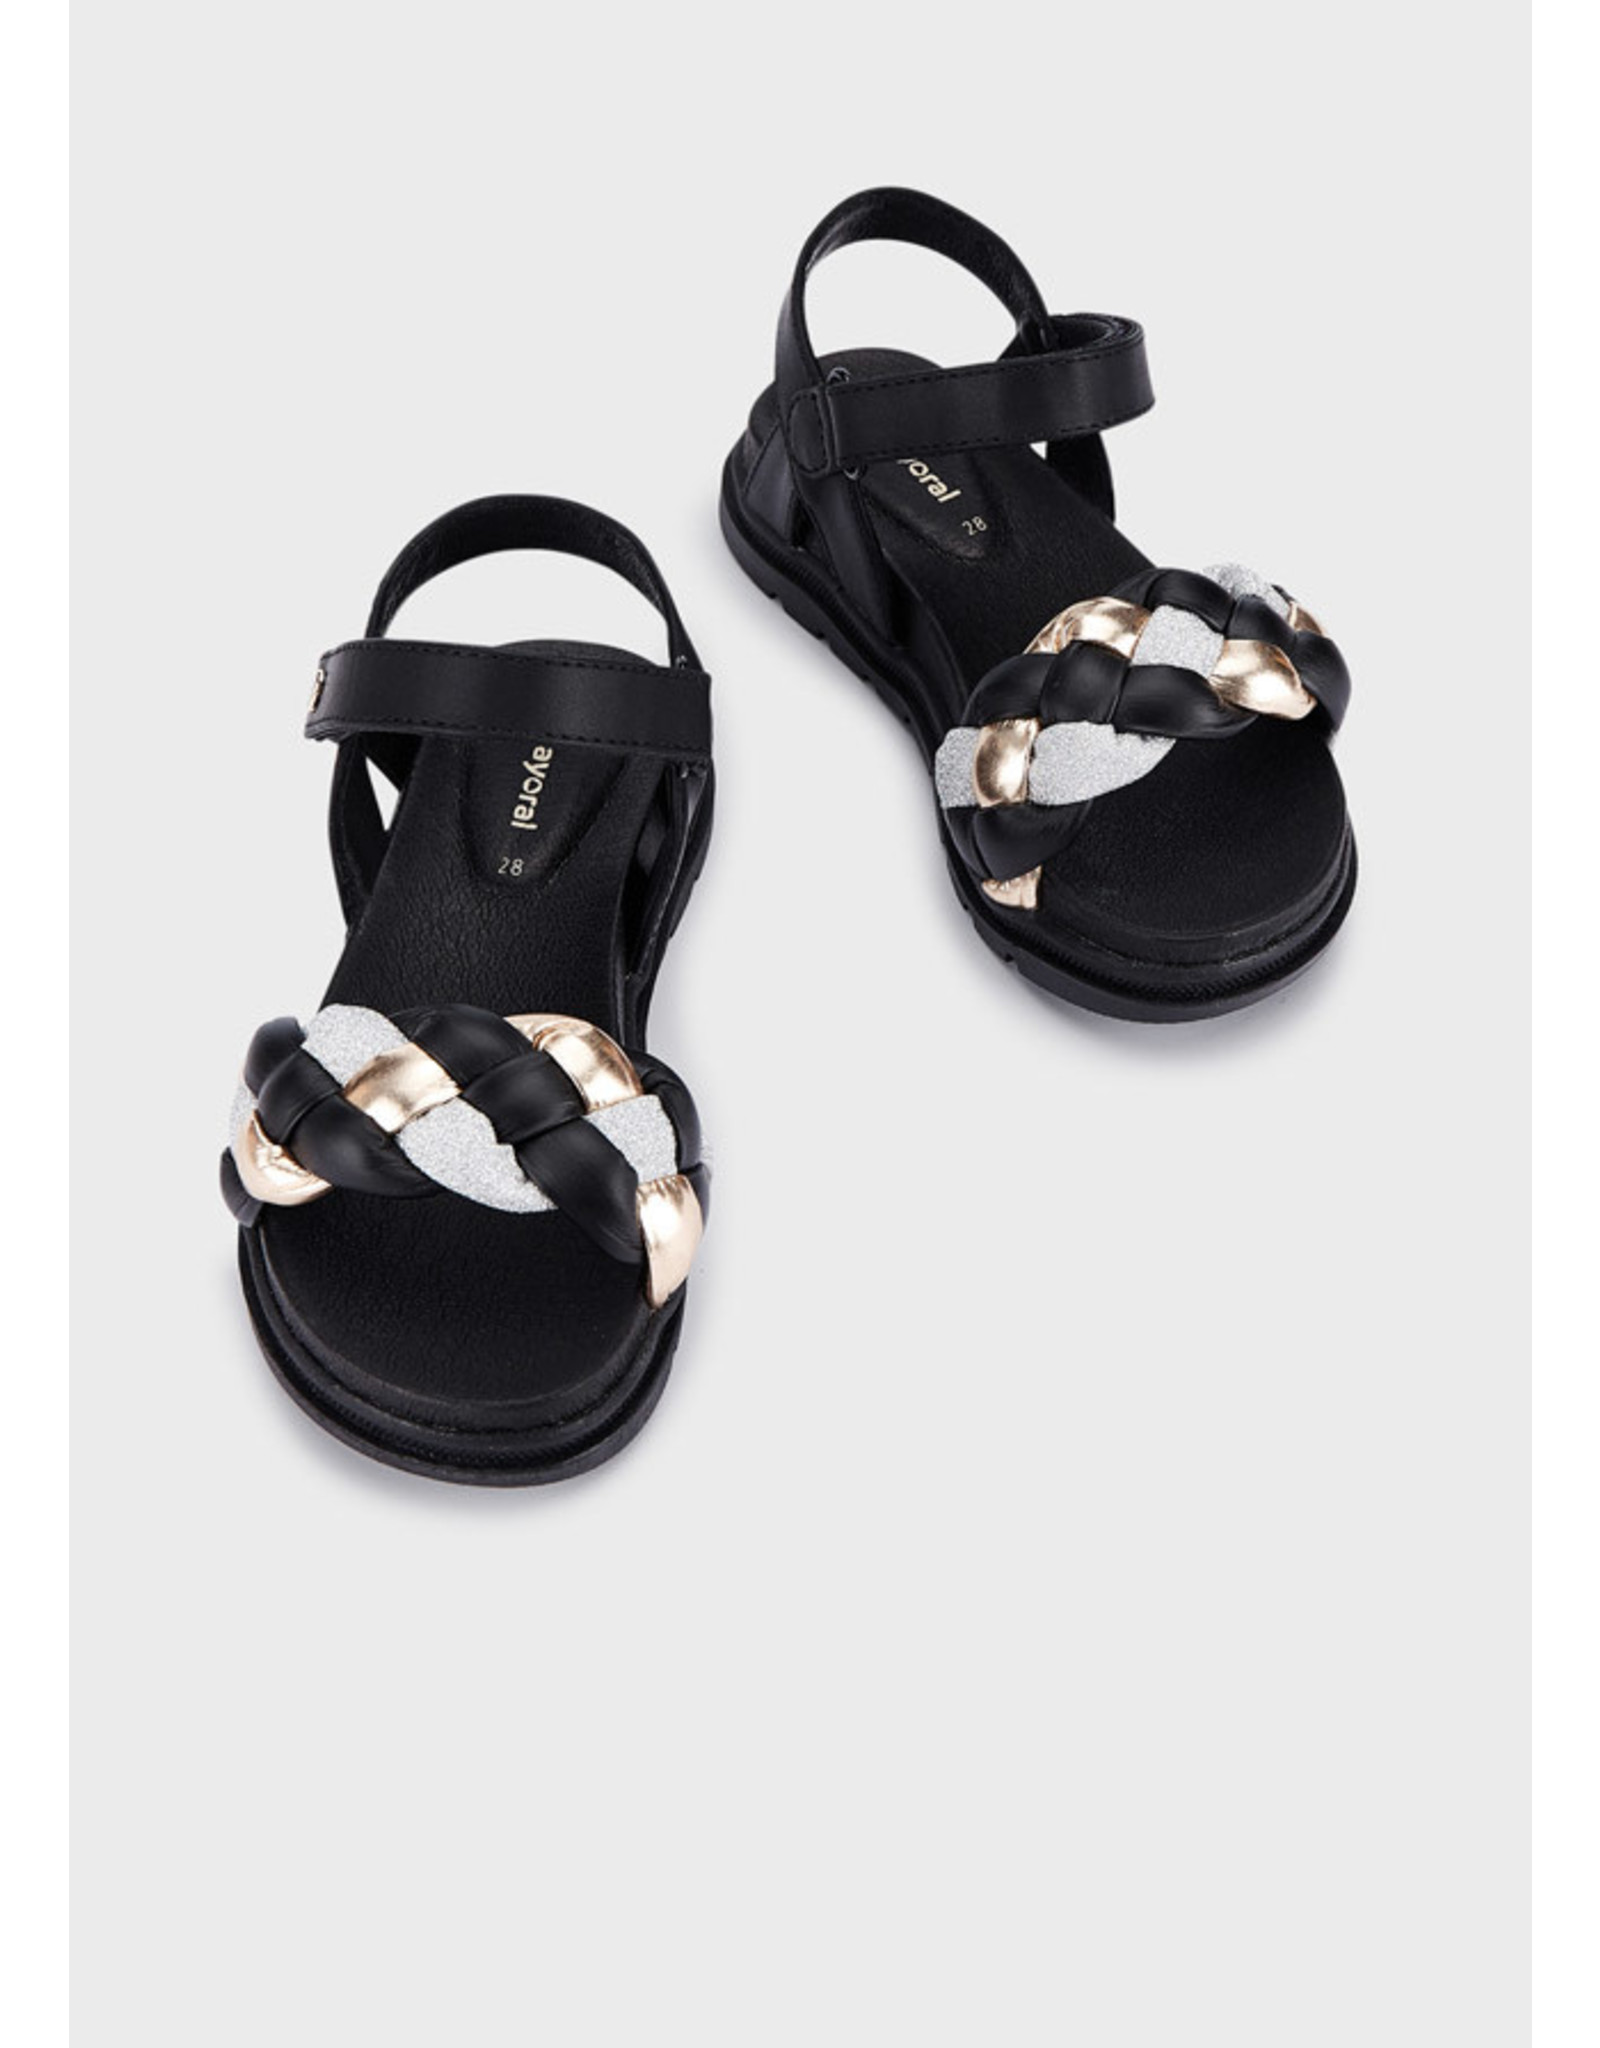 Mayoral Black Sandals w/Gold Accent